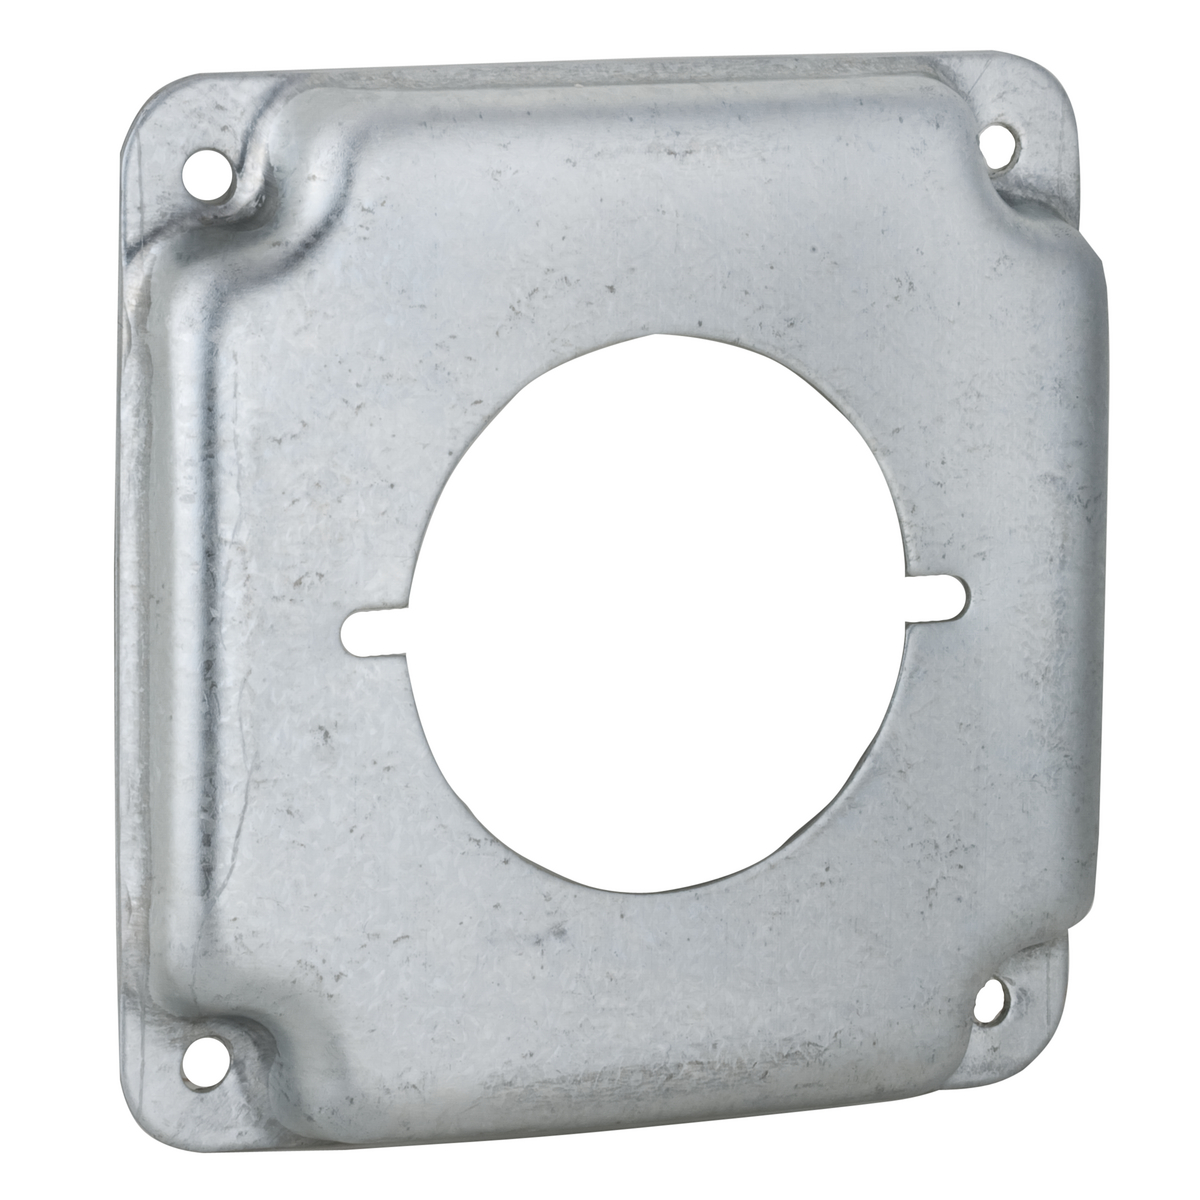 Hubbell-Raco 902C 1 Duplex Receptacle 4-Inch Square Exposed Work Cover 